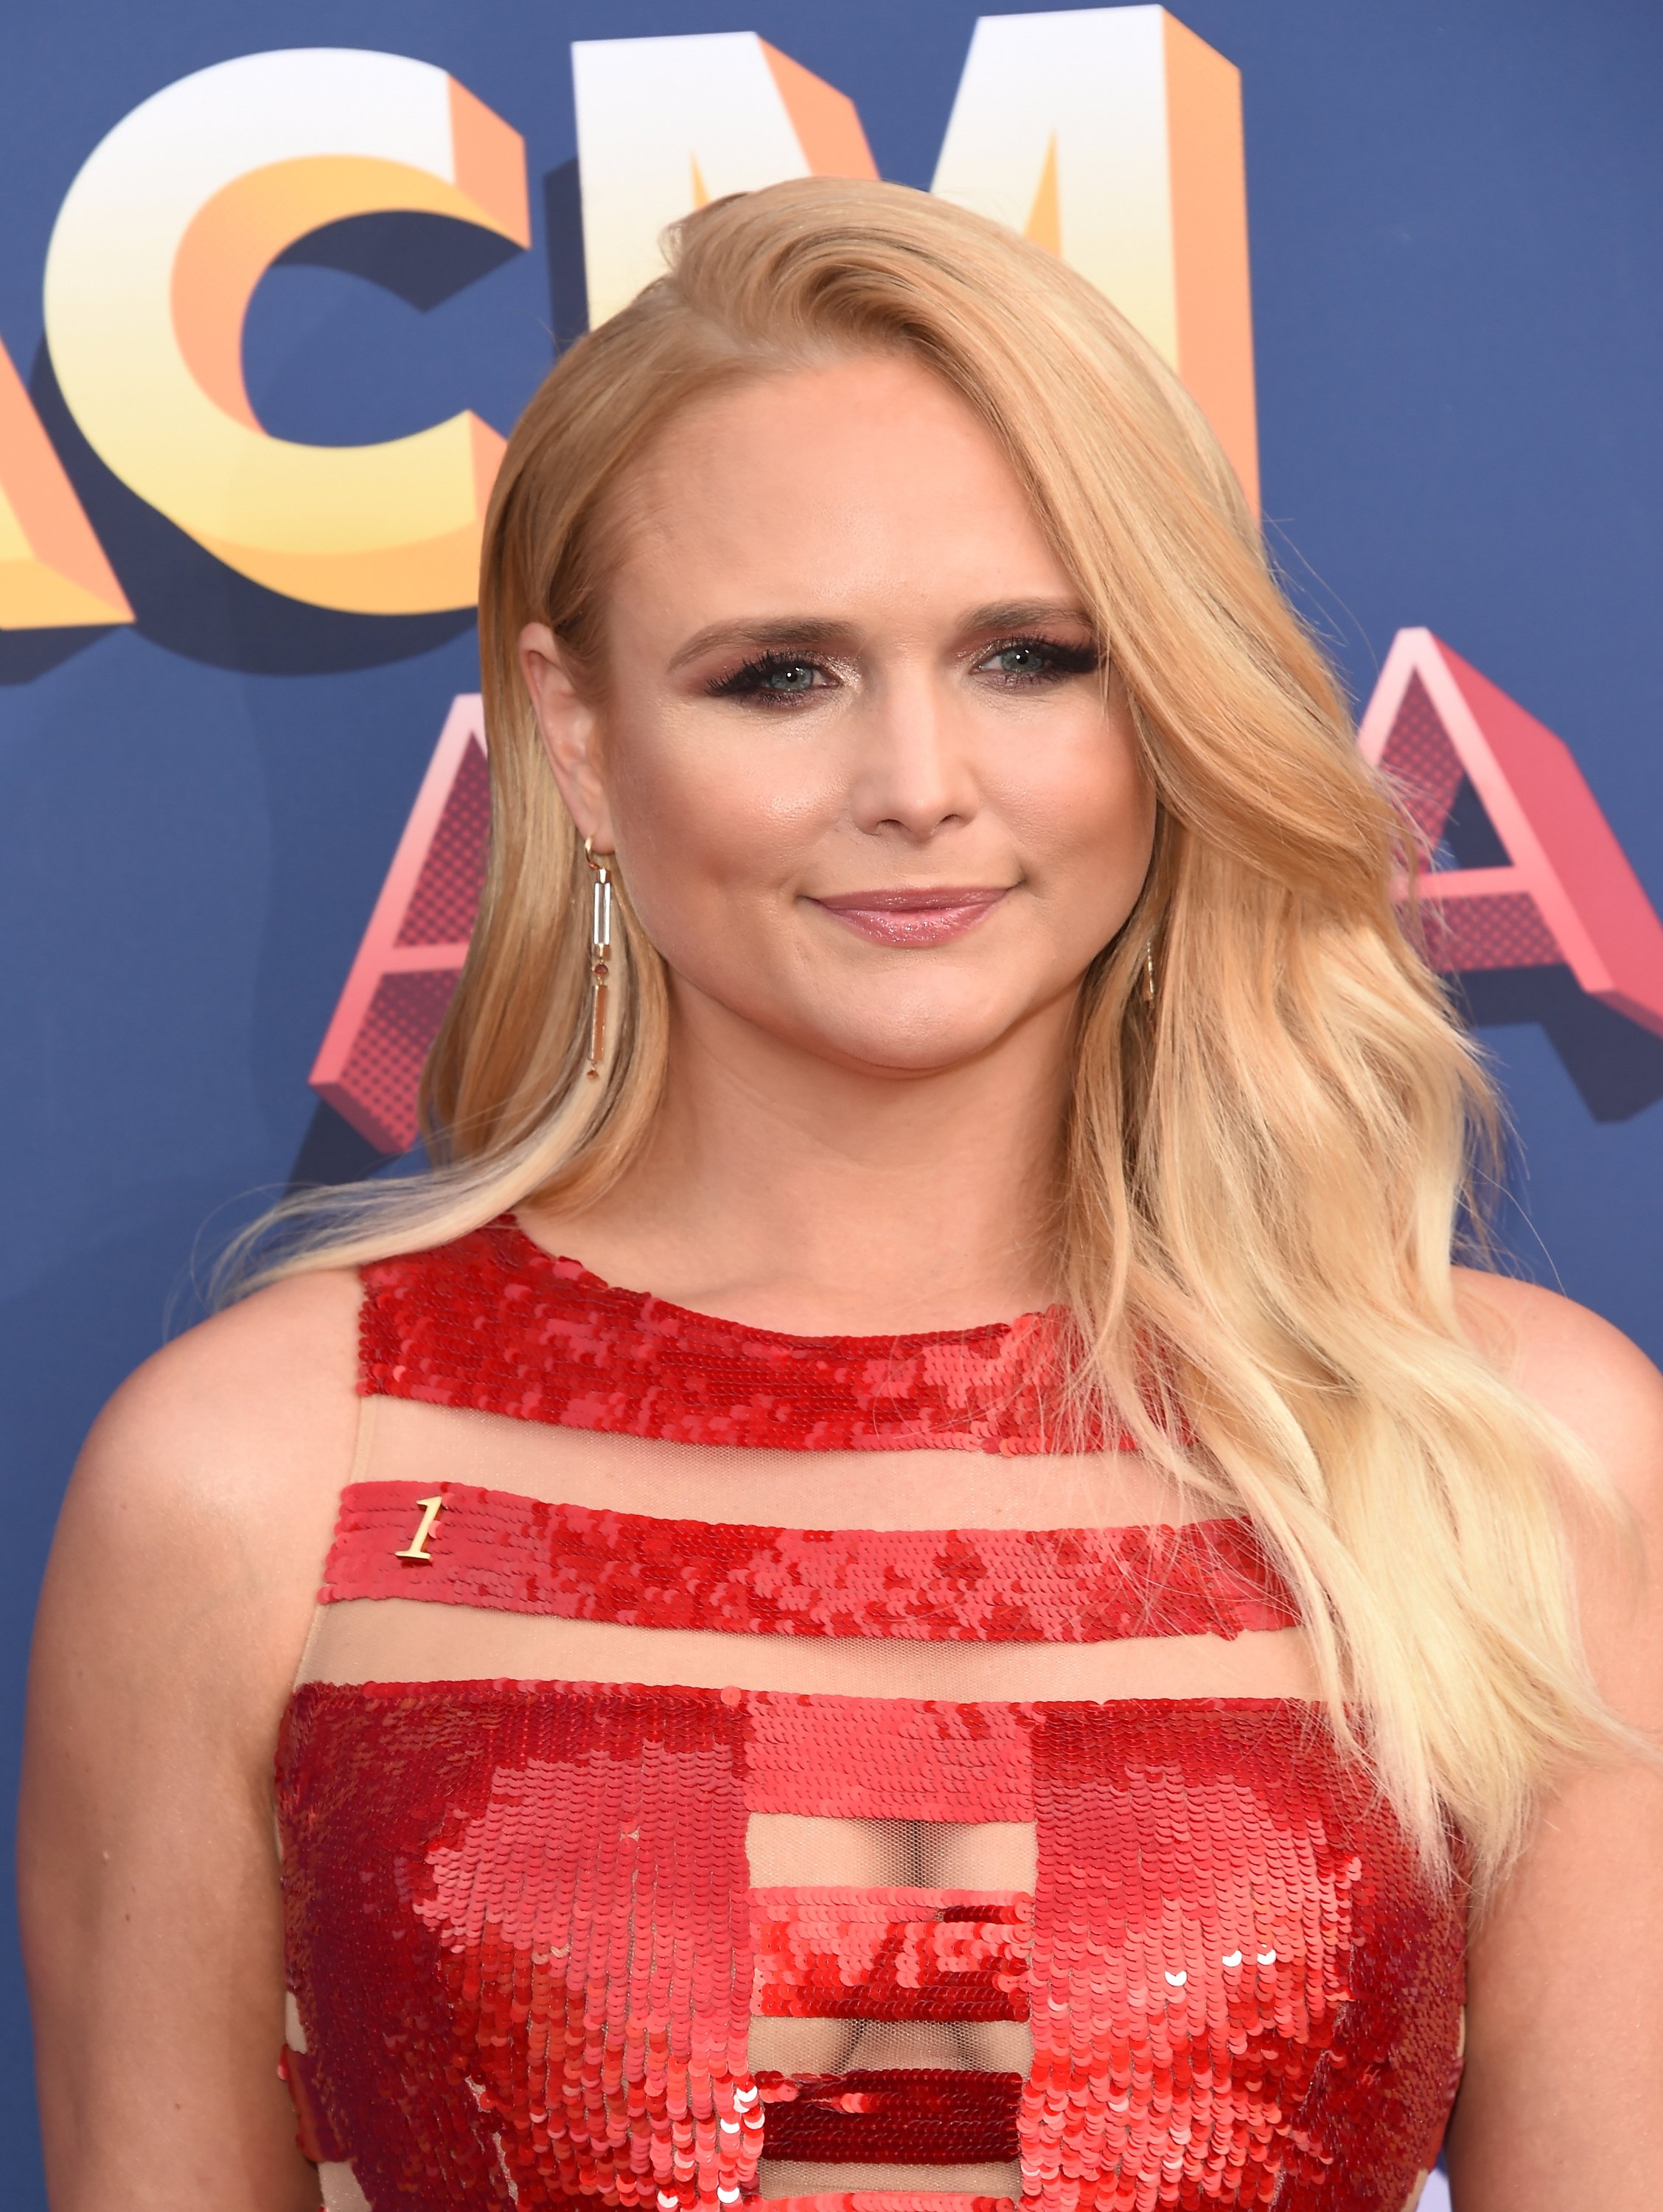 Miranda Lambert pictured at the 53rd Academy of Country Music Awards, 2018, Las Vegas. | Photo: Getty Images